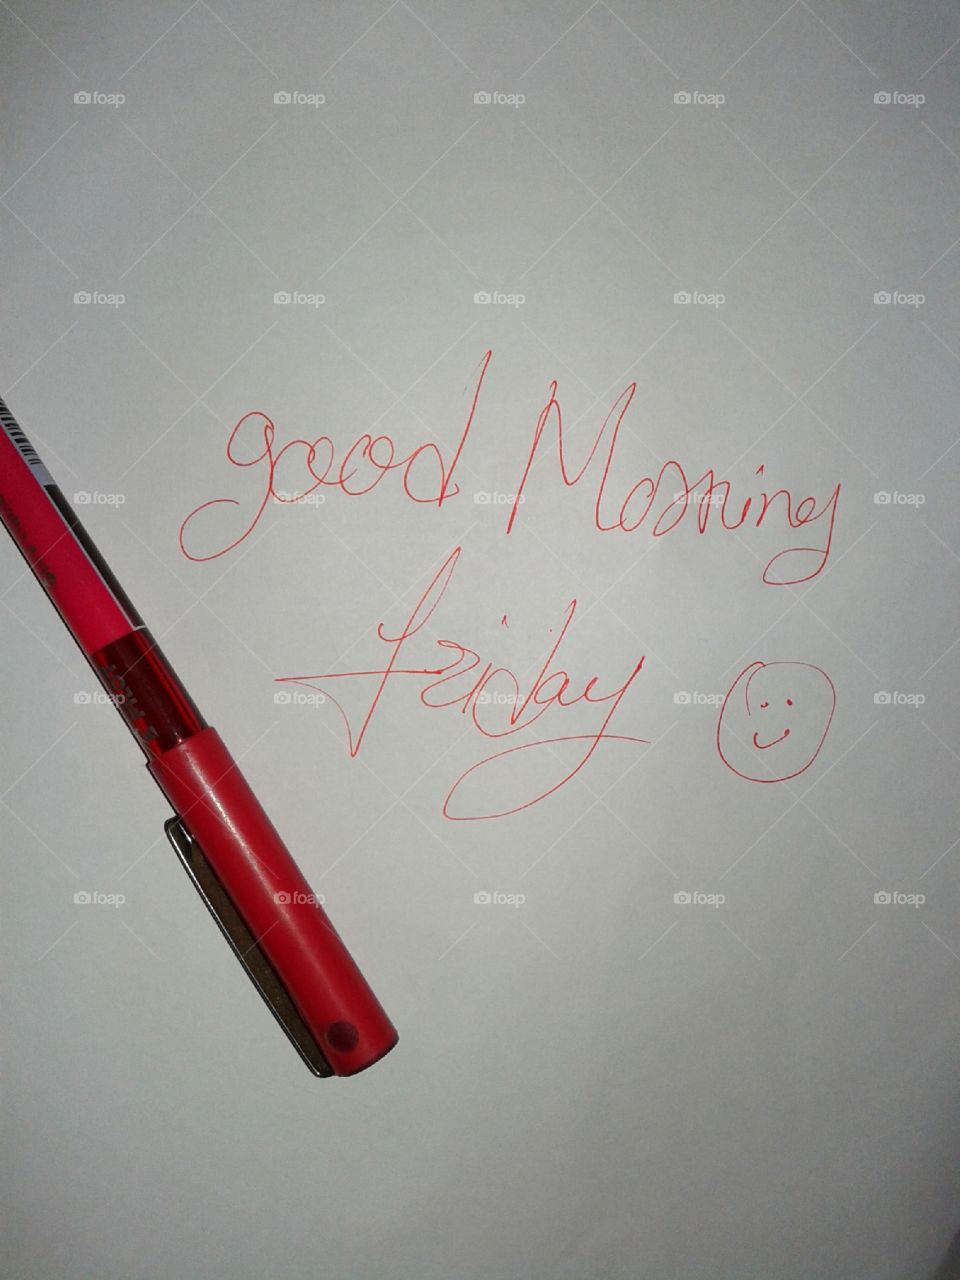 good morning friday with smile, texts on paper shit.